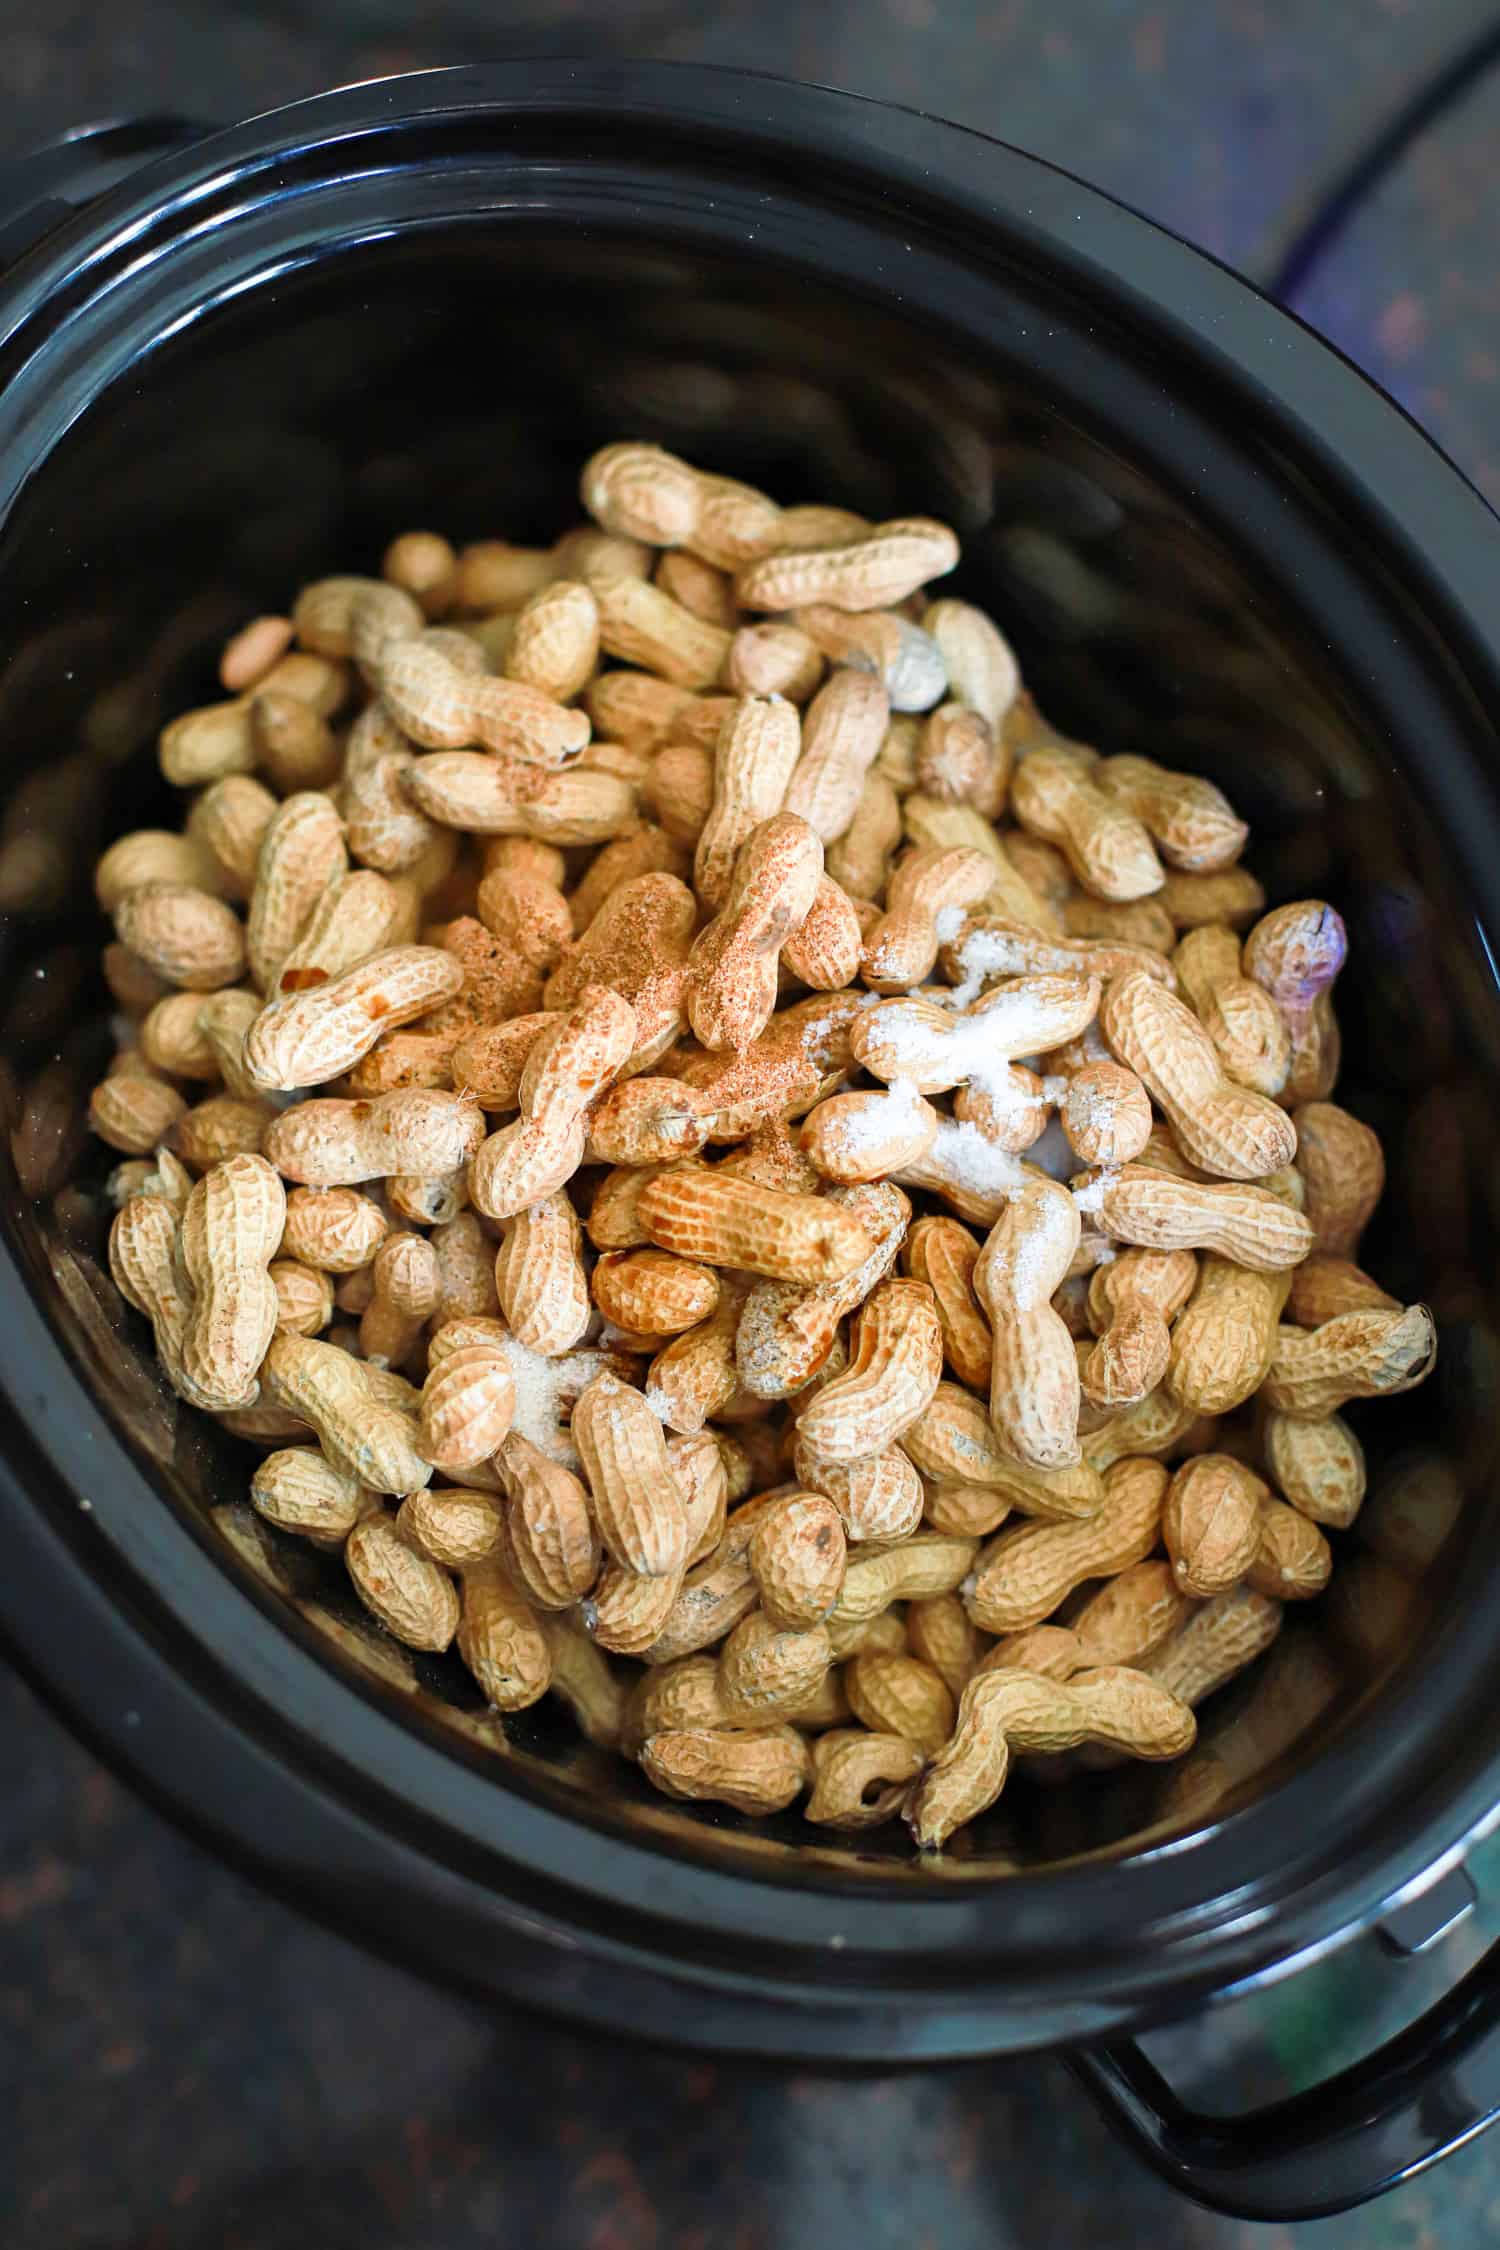 Black slow cooker with raw peanuts and seasonings.